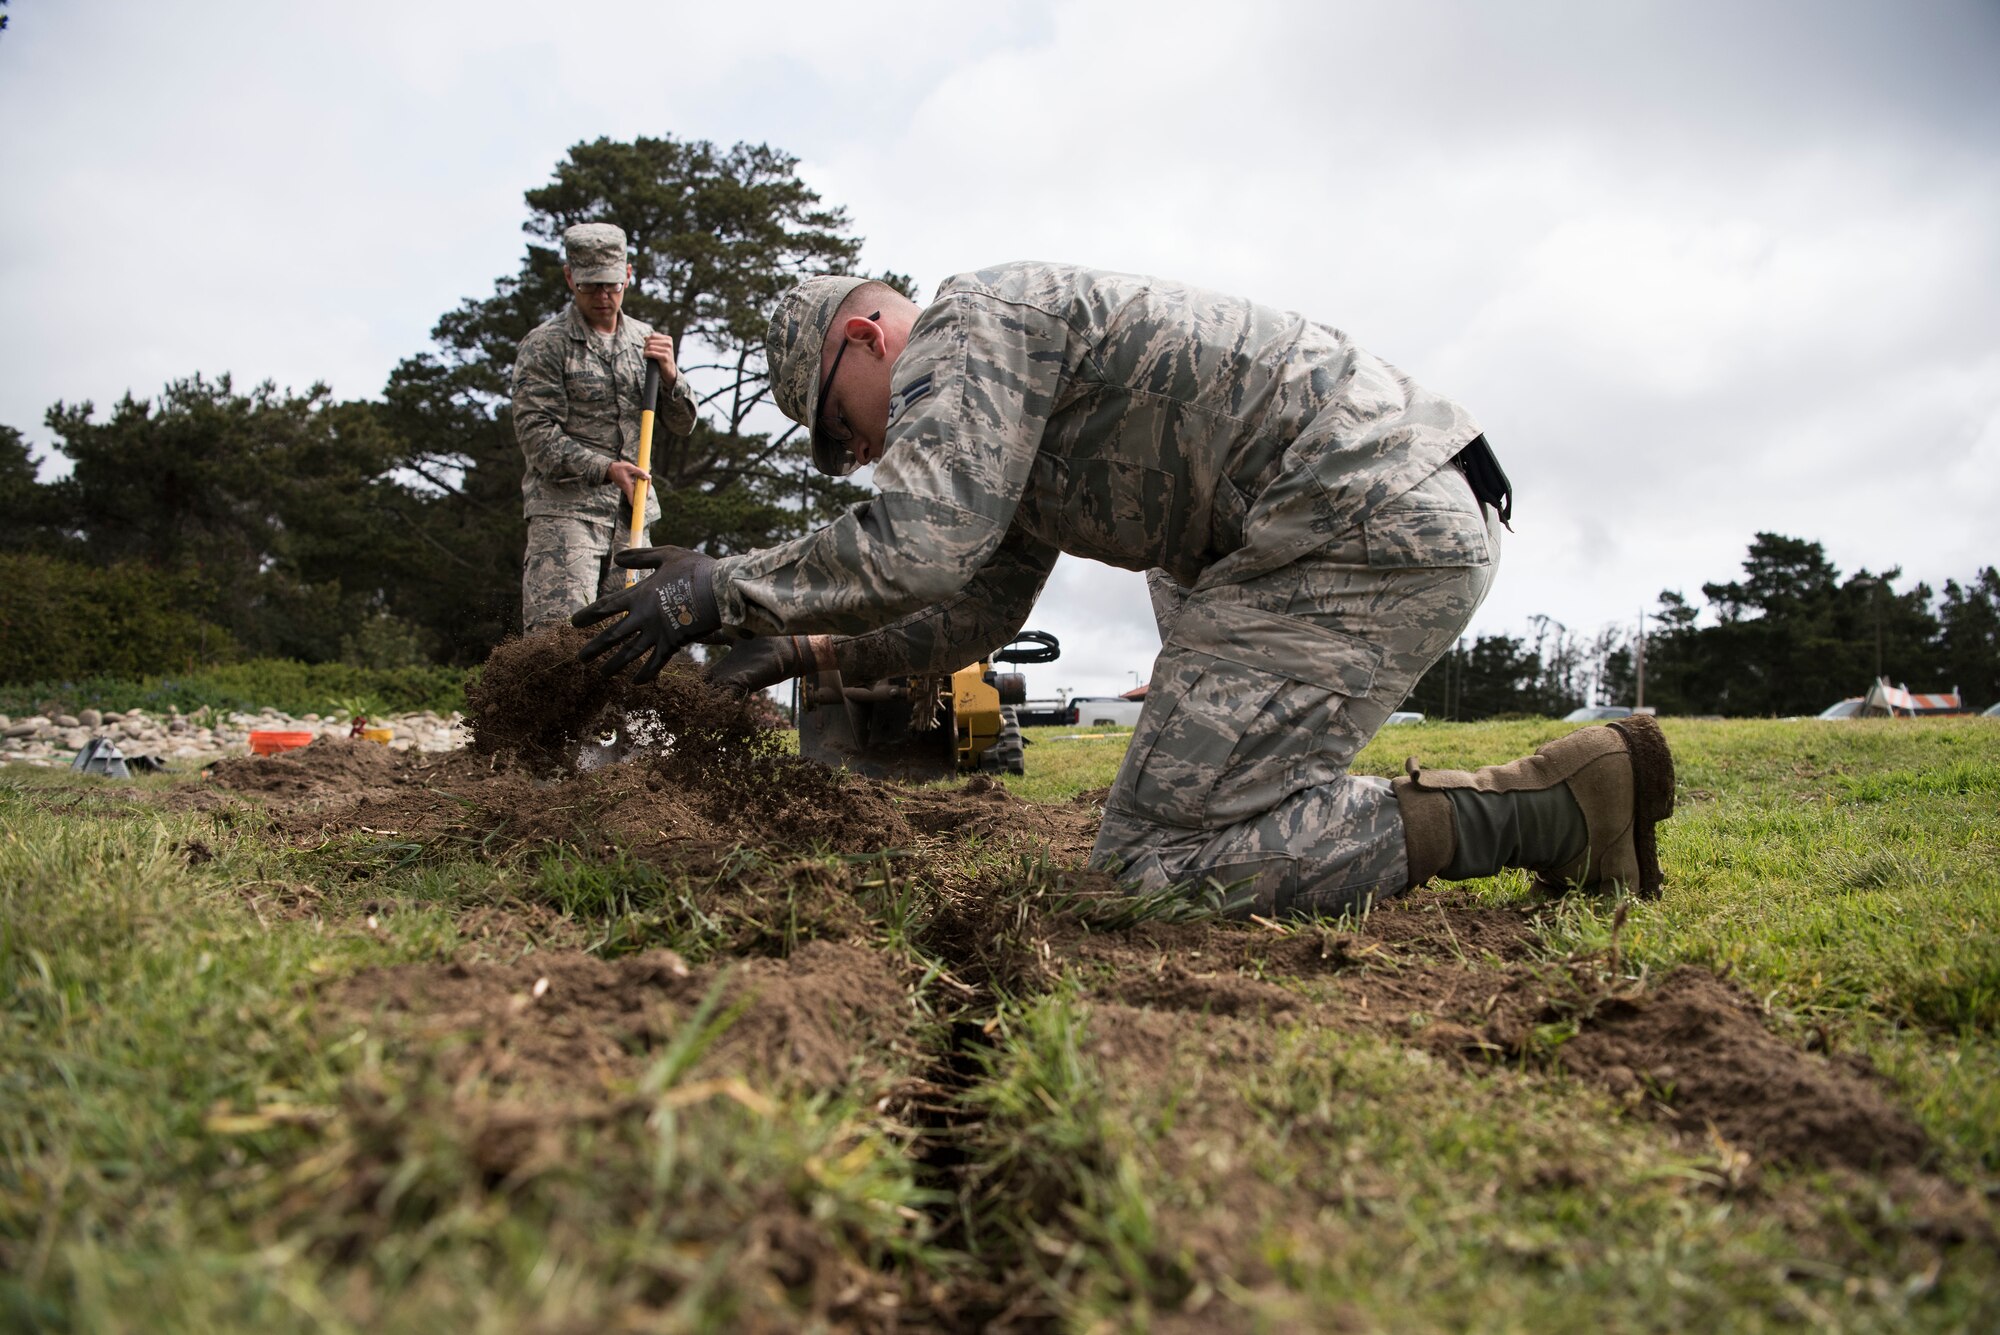 Airman 1st Class Tristan Gibson, 30th Civil Engineering Squadron Airman, participates in base repairs April 4, 2019, on Vandenberg Air Force Base, Calif. Gibson helps maintain Vandenberg AFB and makes repairs and upgrades when needed. (U.S. Air Force photo by Airman 1st Class Hanah Abercrombie)